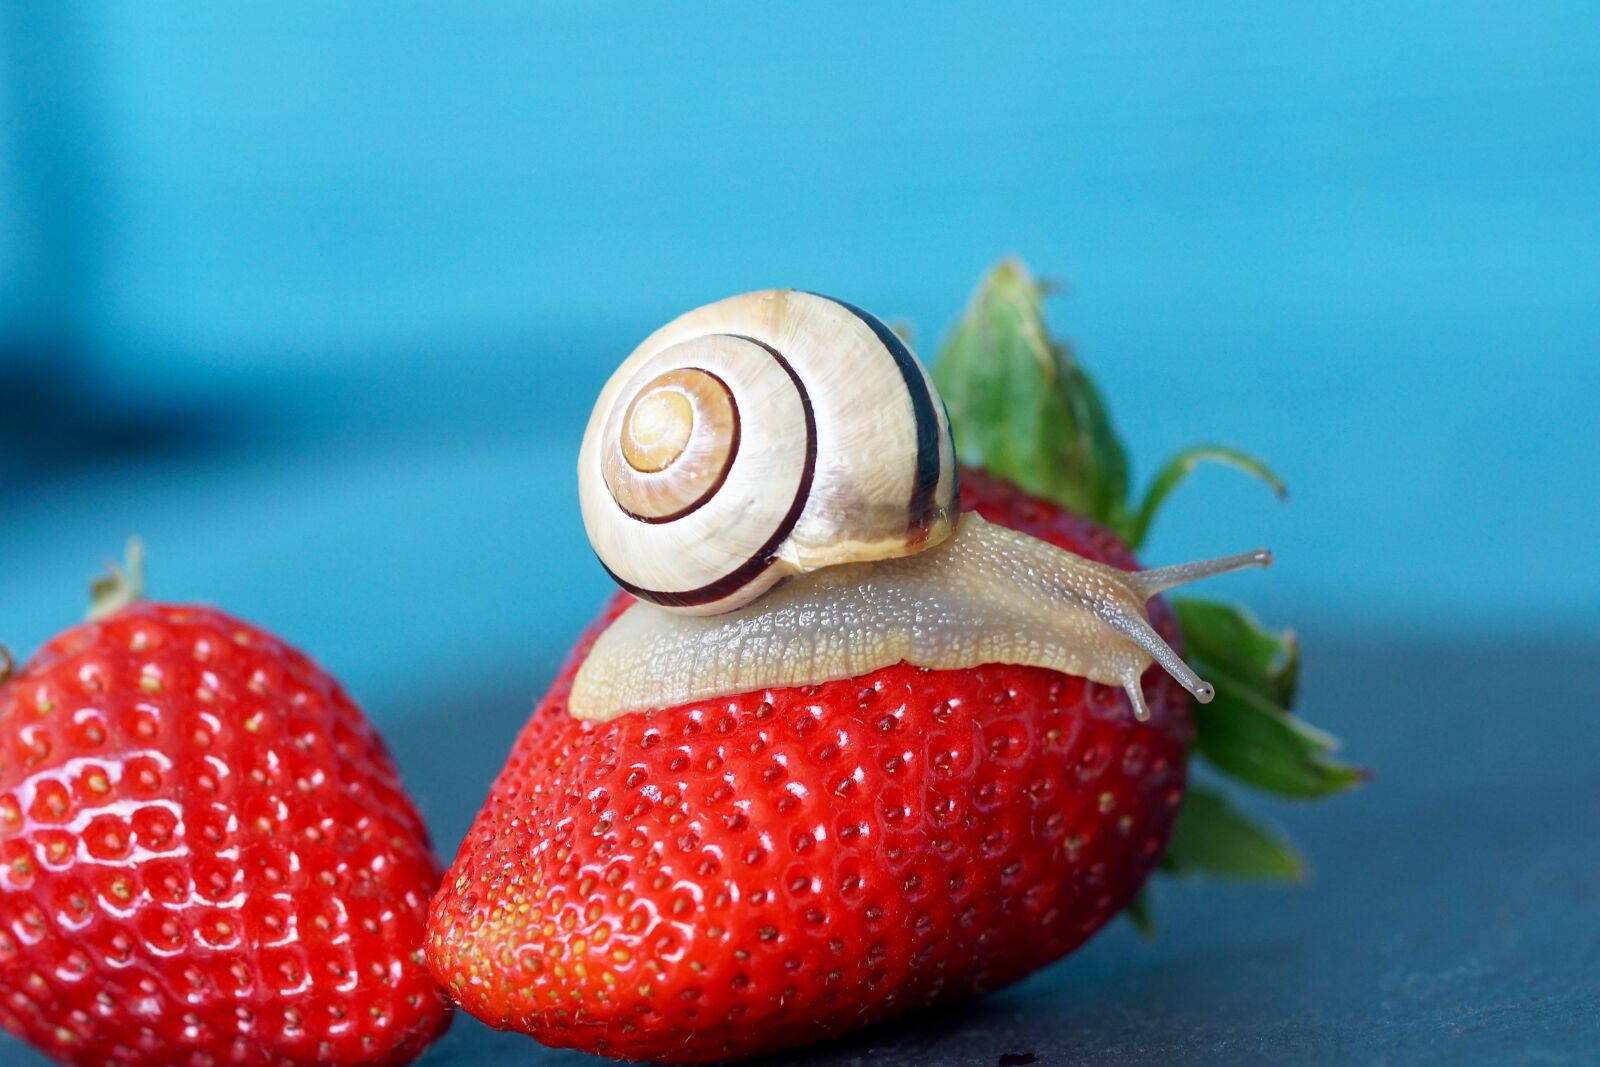 Sony ILCA-77M2 + Tamron SP AF 90mm F2.8 Di Macro sample photo. Strawberry, snail, shell photography